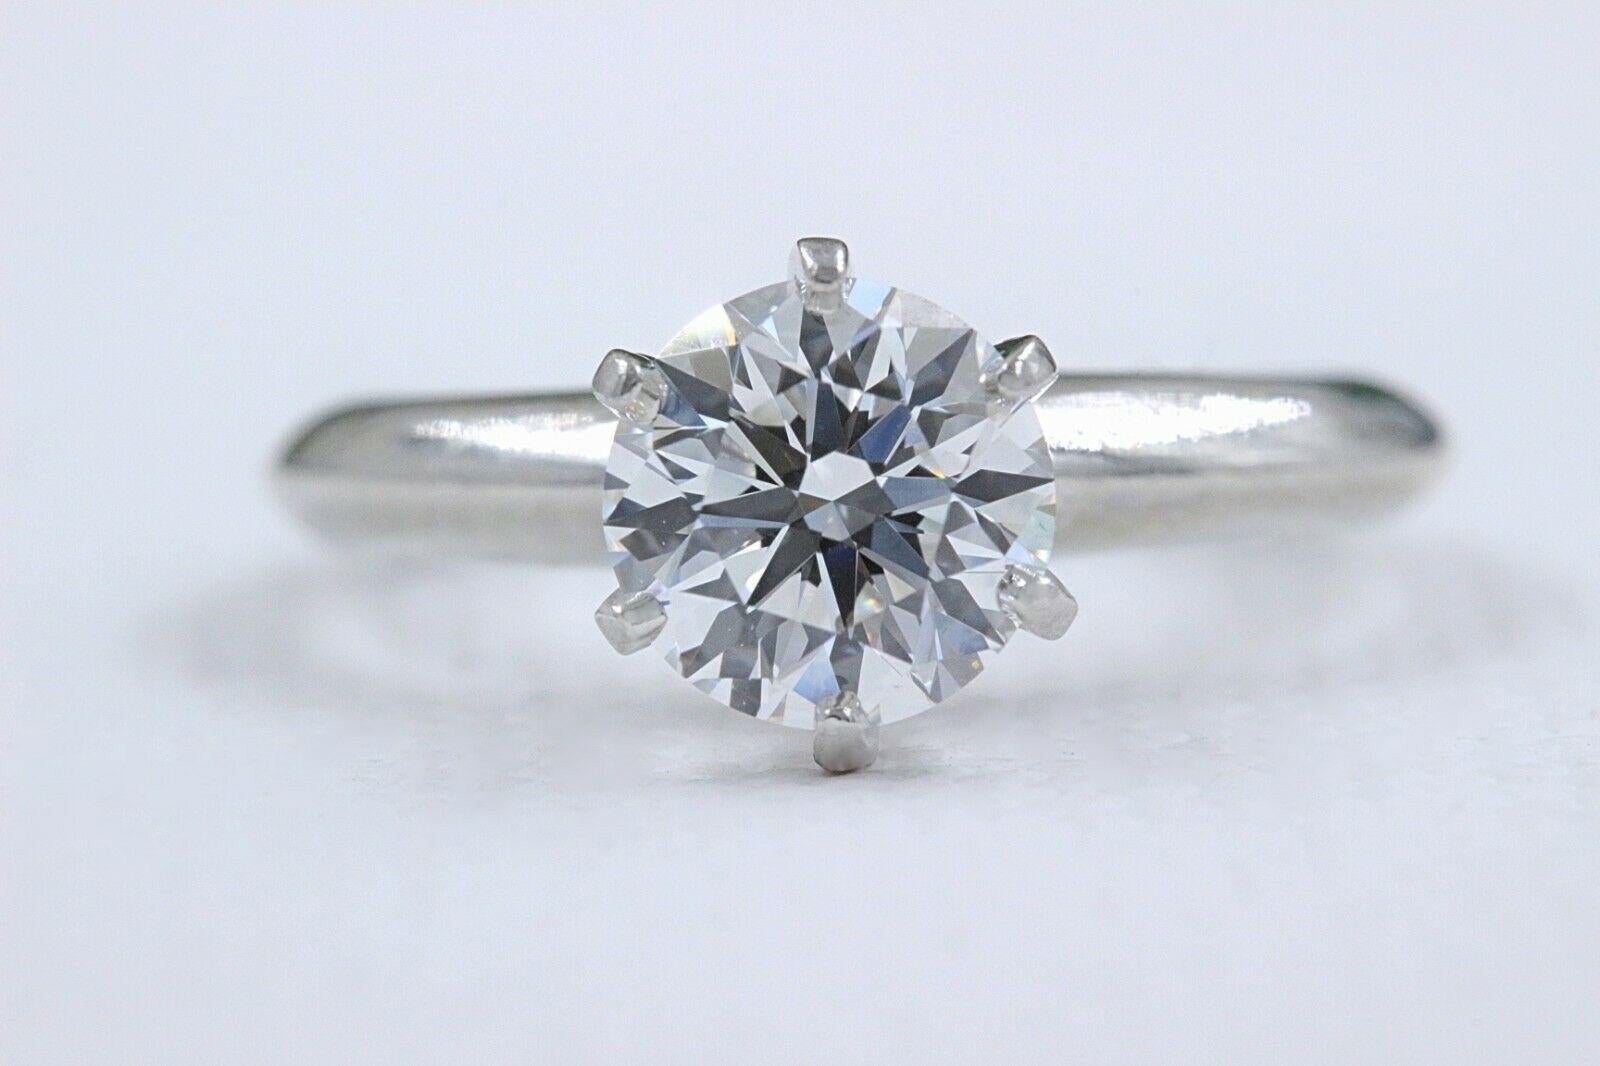 Tiffany & Co. Round Diamond Engagement Ring 1.23 Carat GVS2 Platinum In Excellent Condition For Sale In San Diego, CA